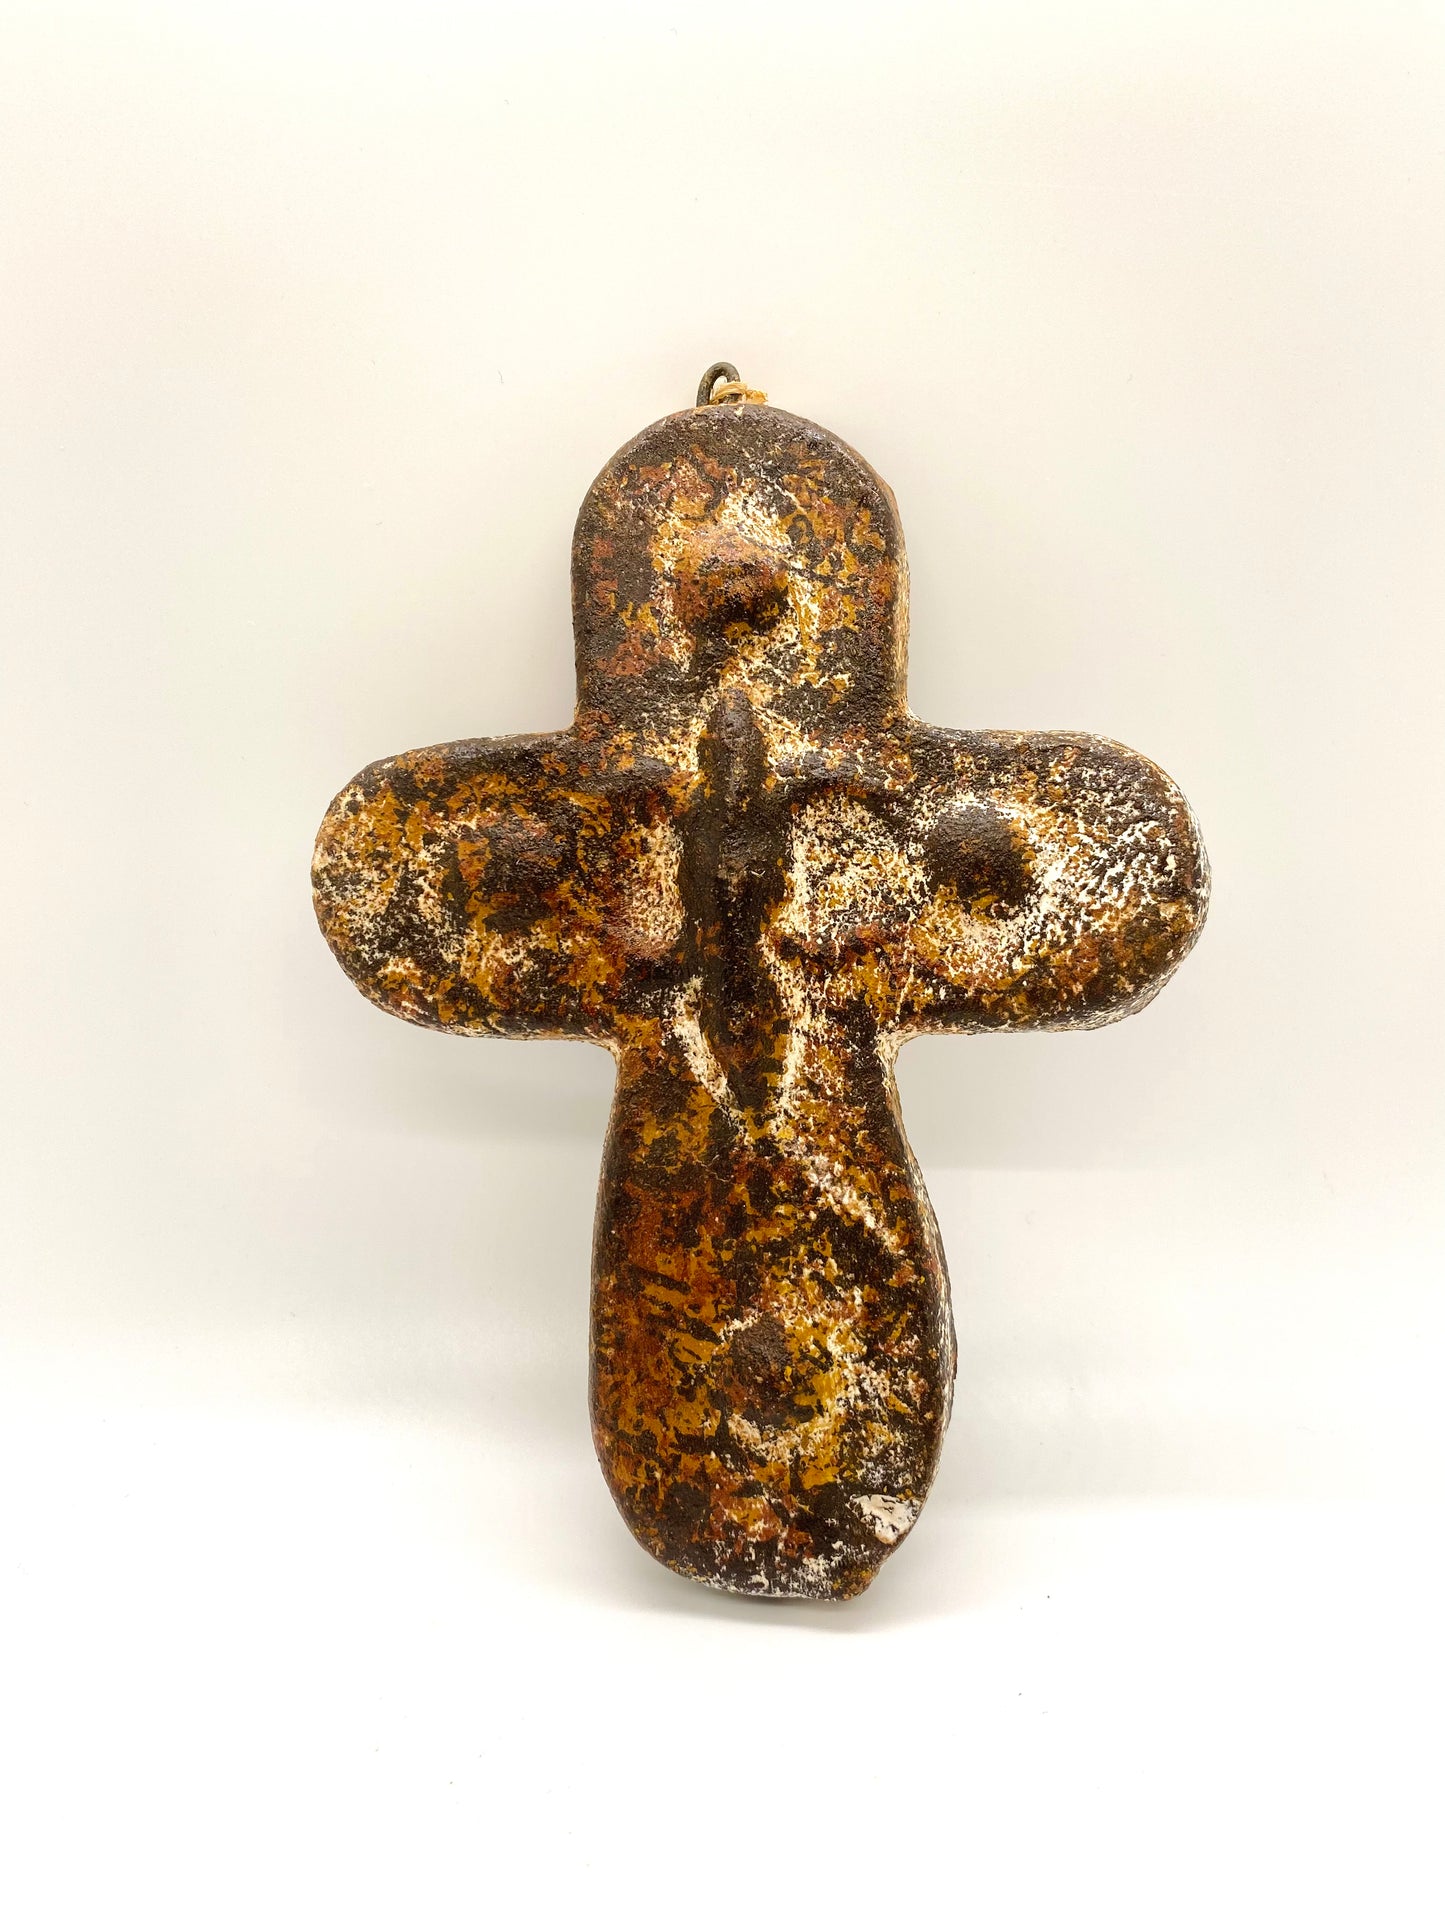 Rounded Decorative Crosses